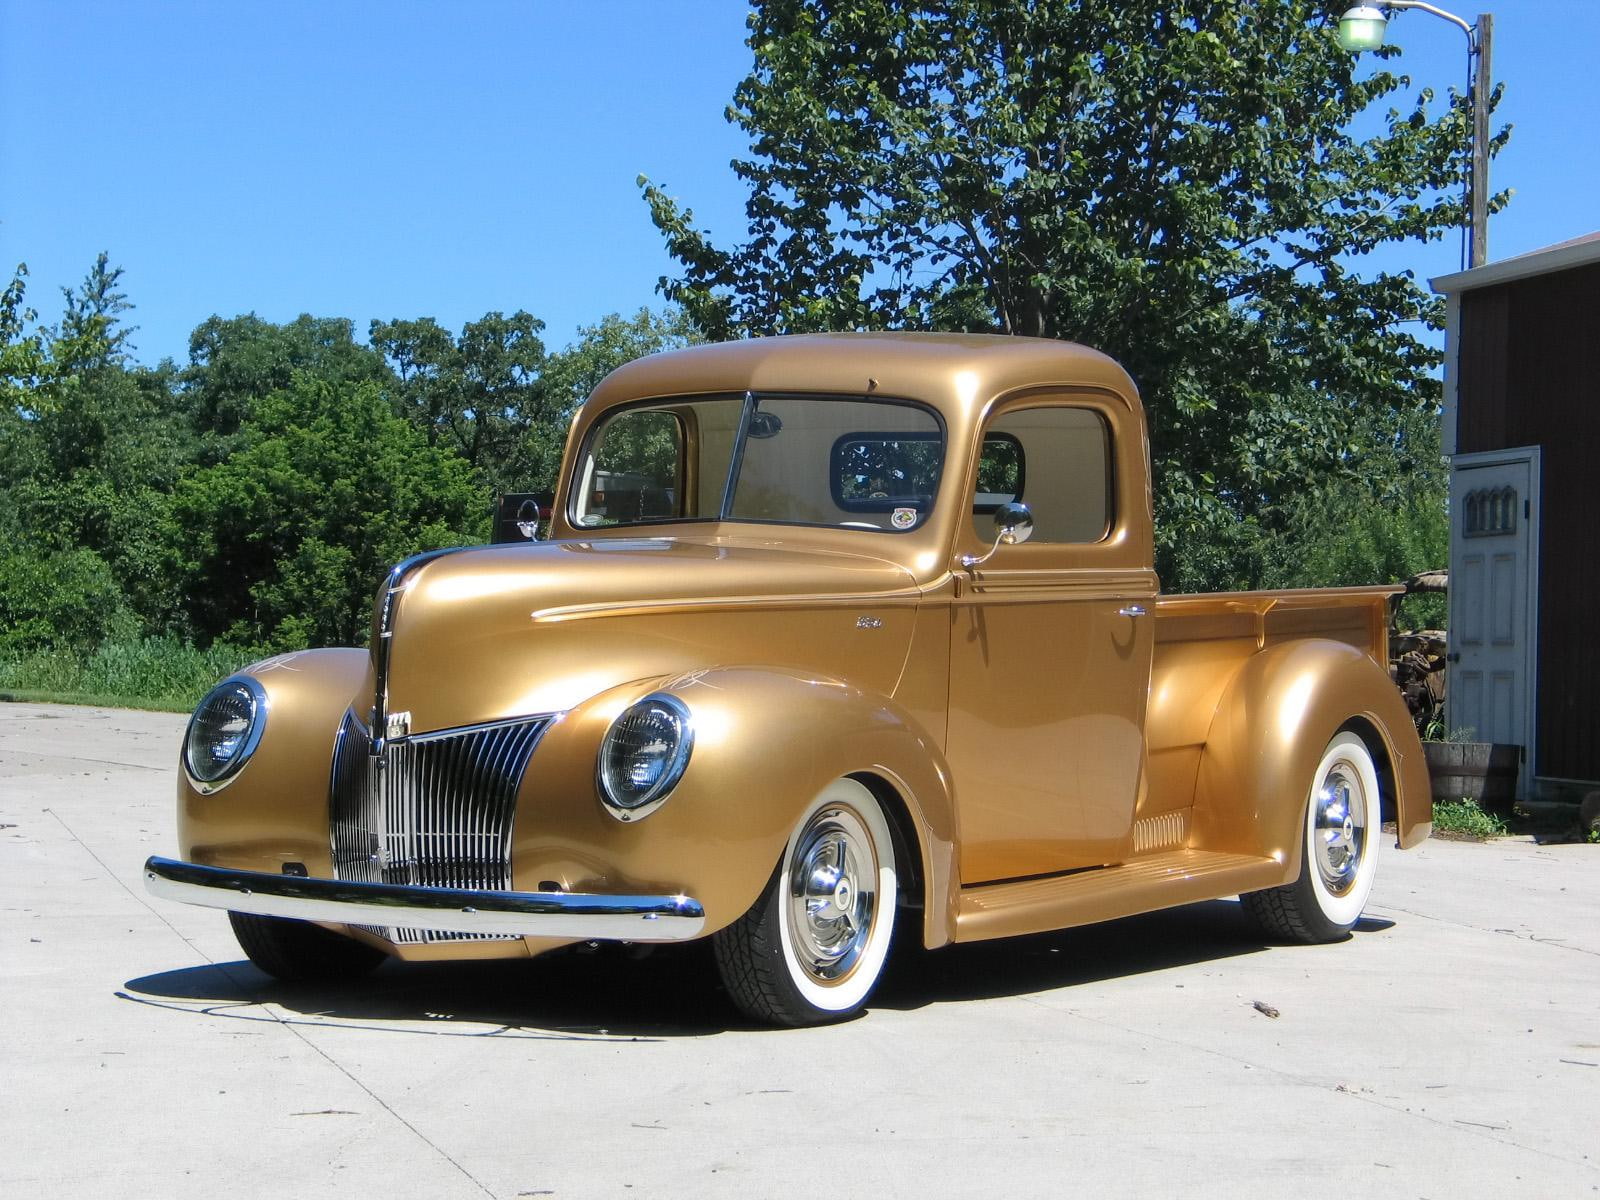 1940 Ford Pickup Truck Retro Hot Rod Rods Lowrider Lowriders, gold single cab pickup truck